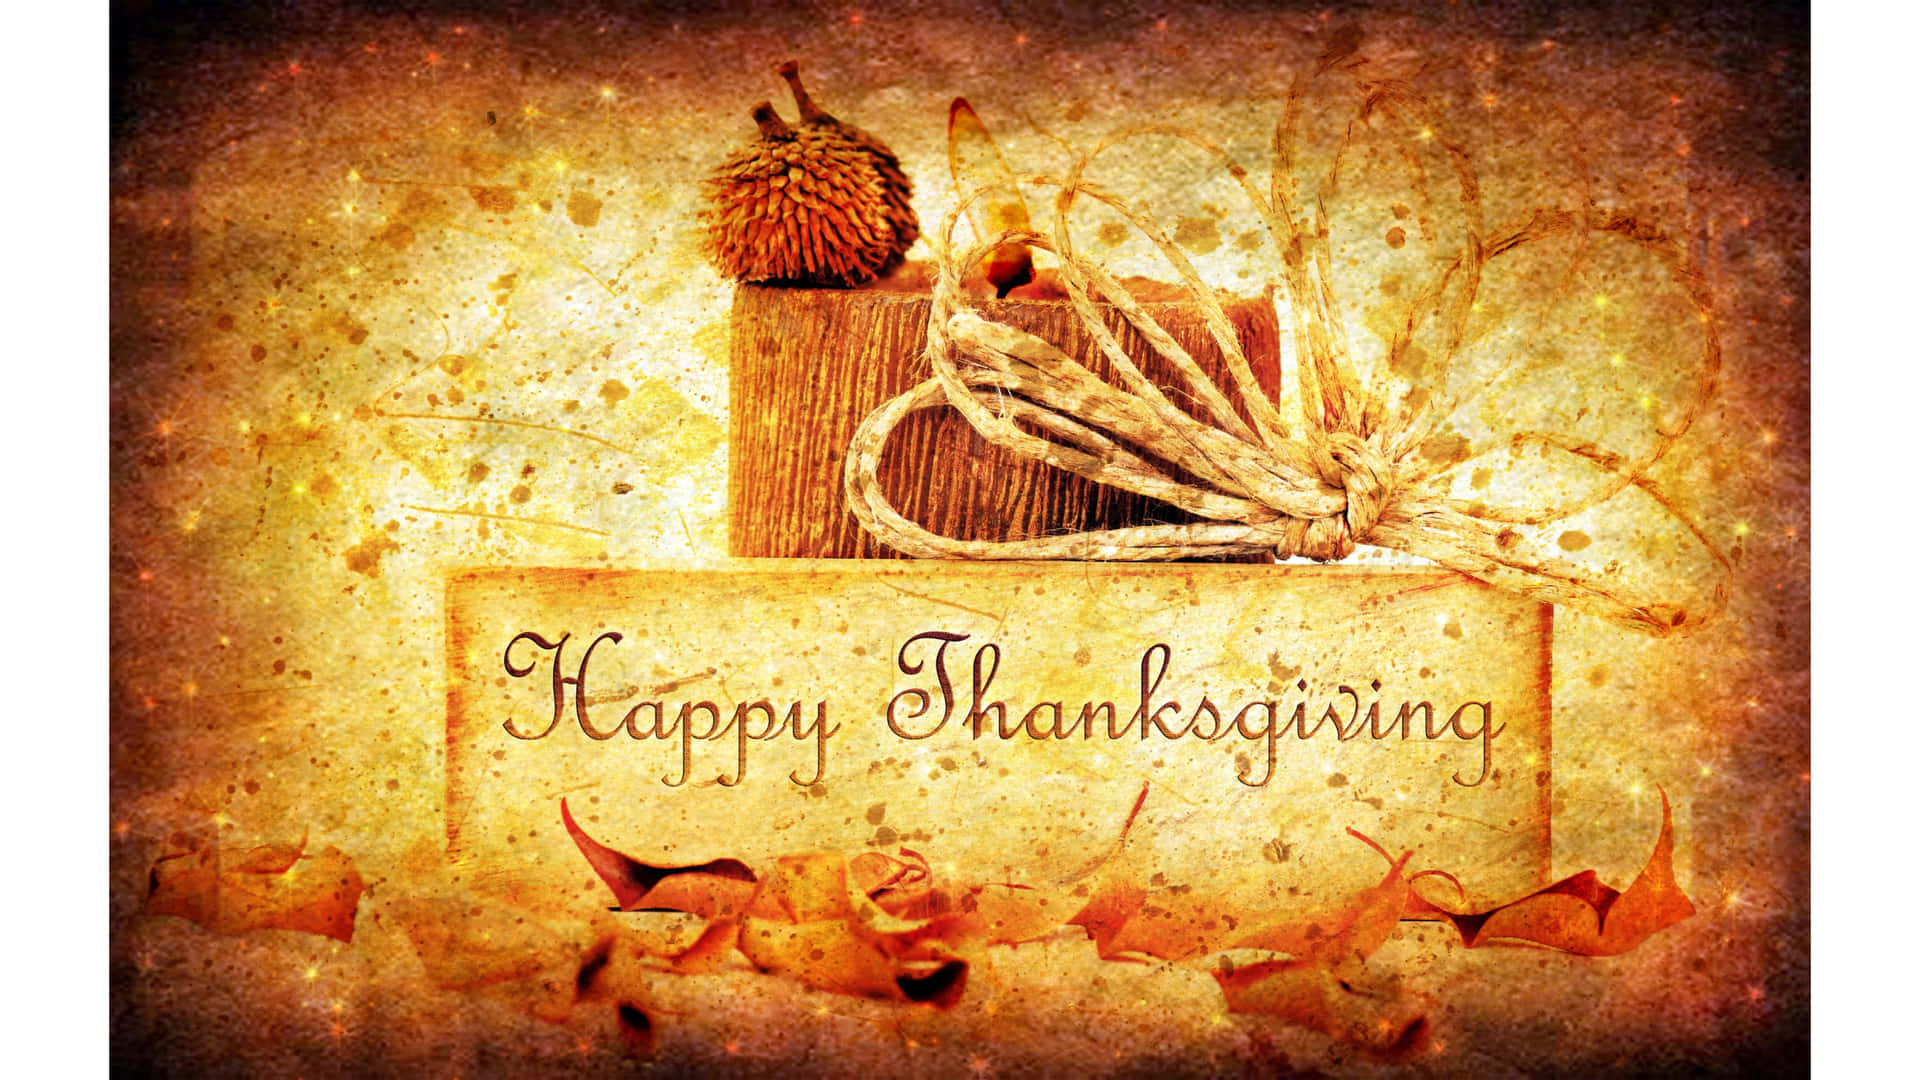 Let us all join hands and be thankful for our blessings this holiday season. Wallpaper